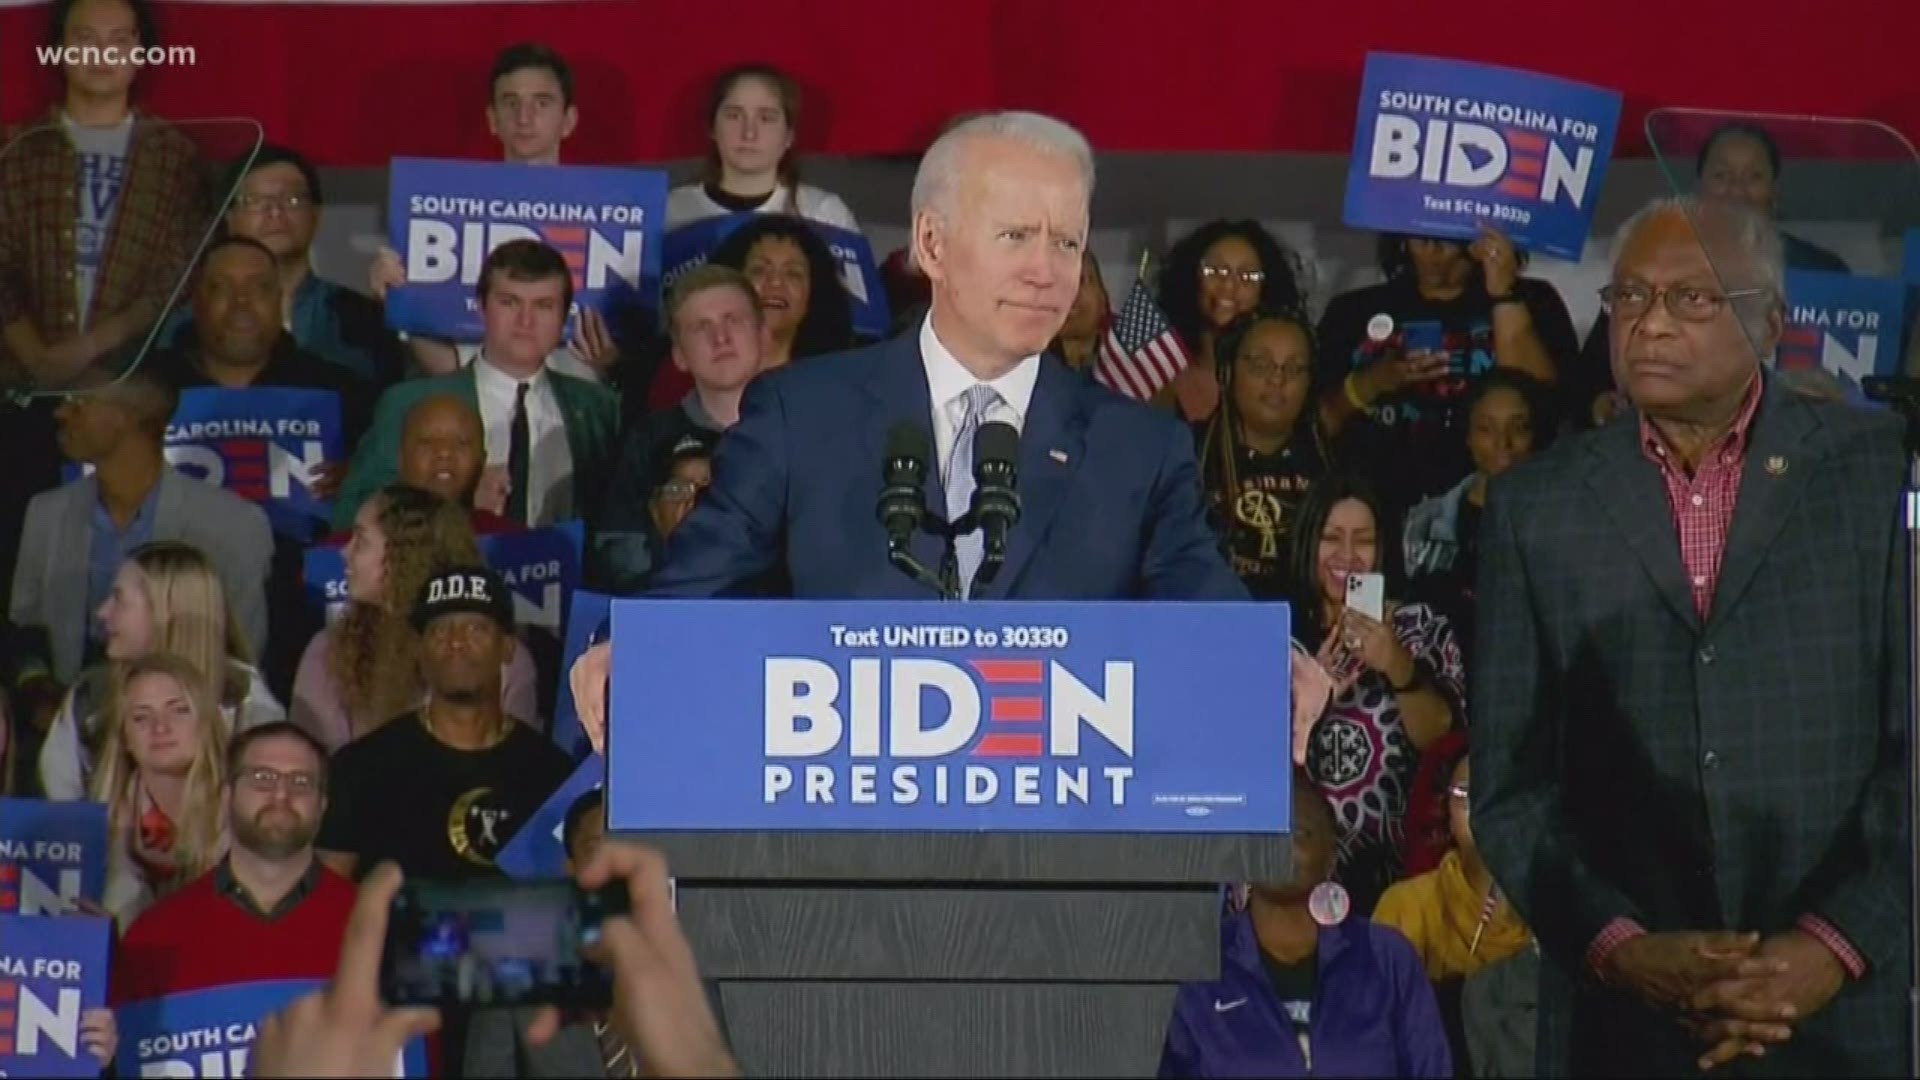 Shortly after polls closed in North Carolina, several news outlets called the race for Joe Biden.